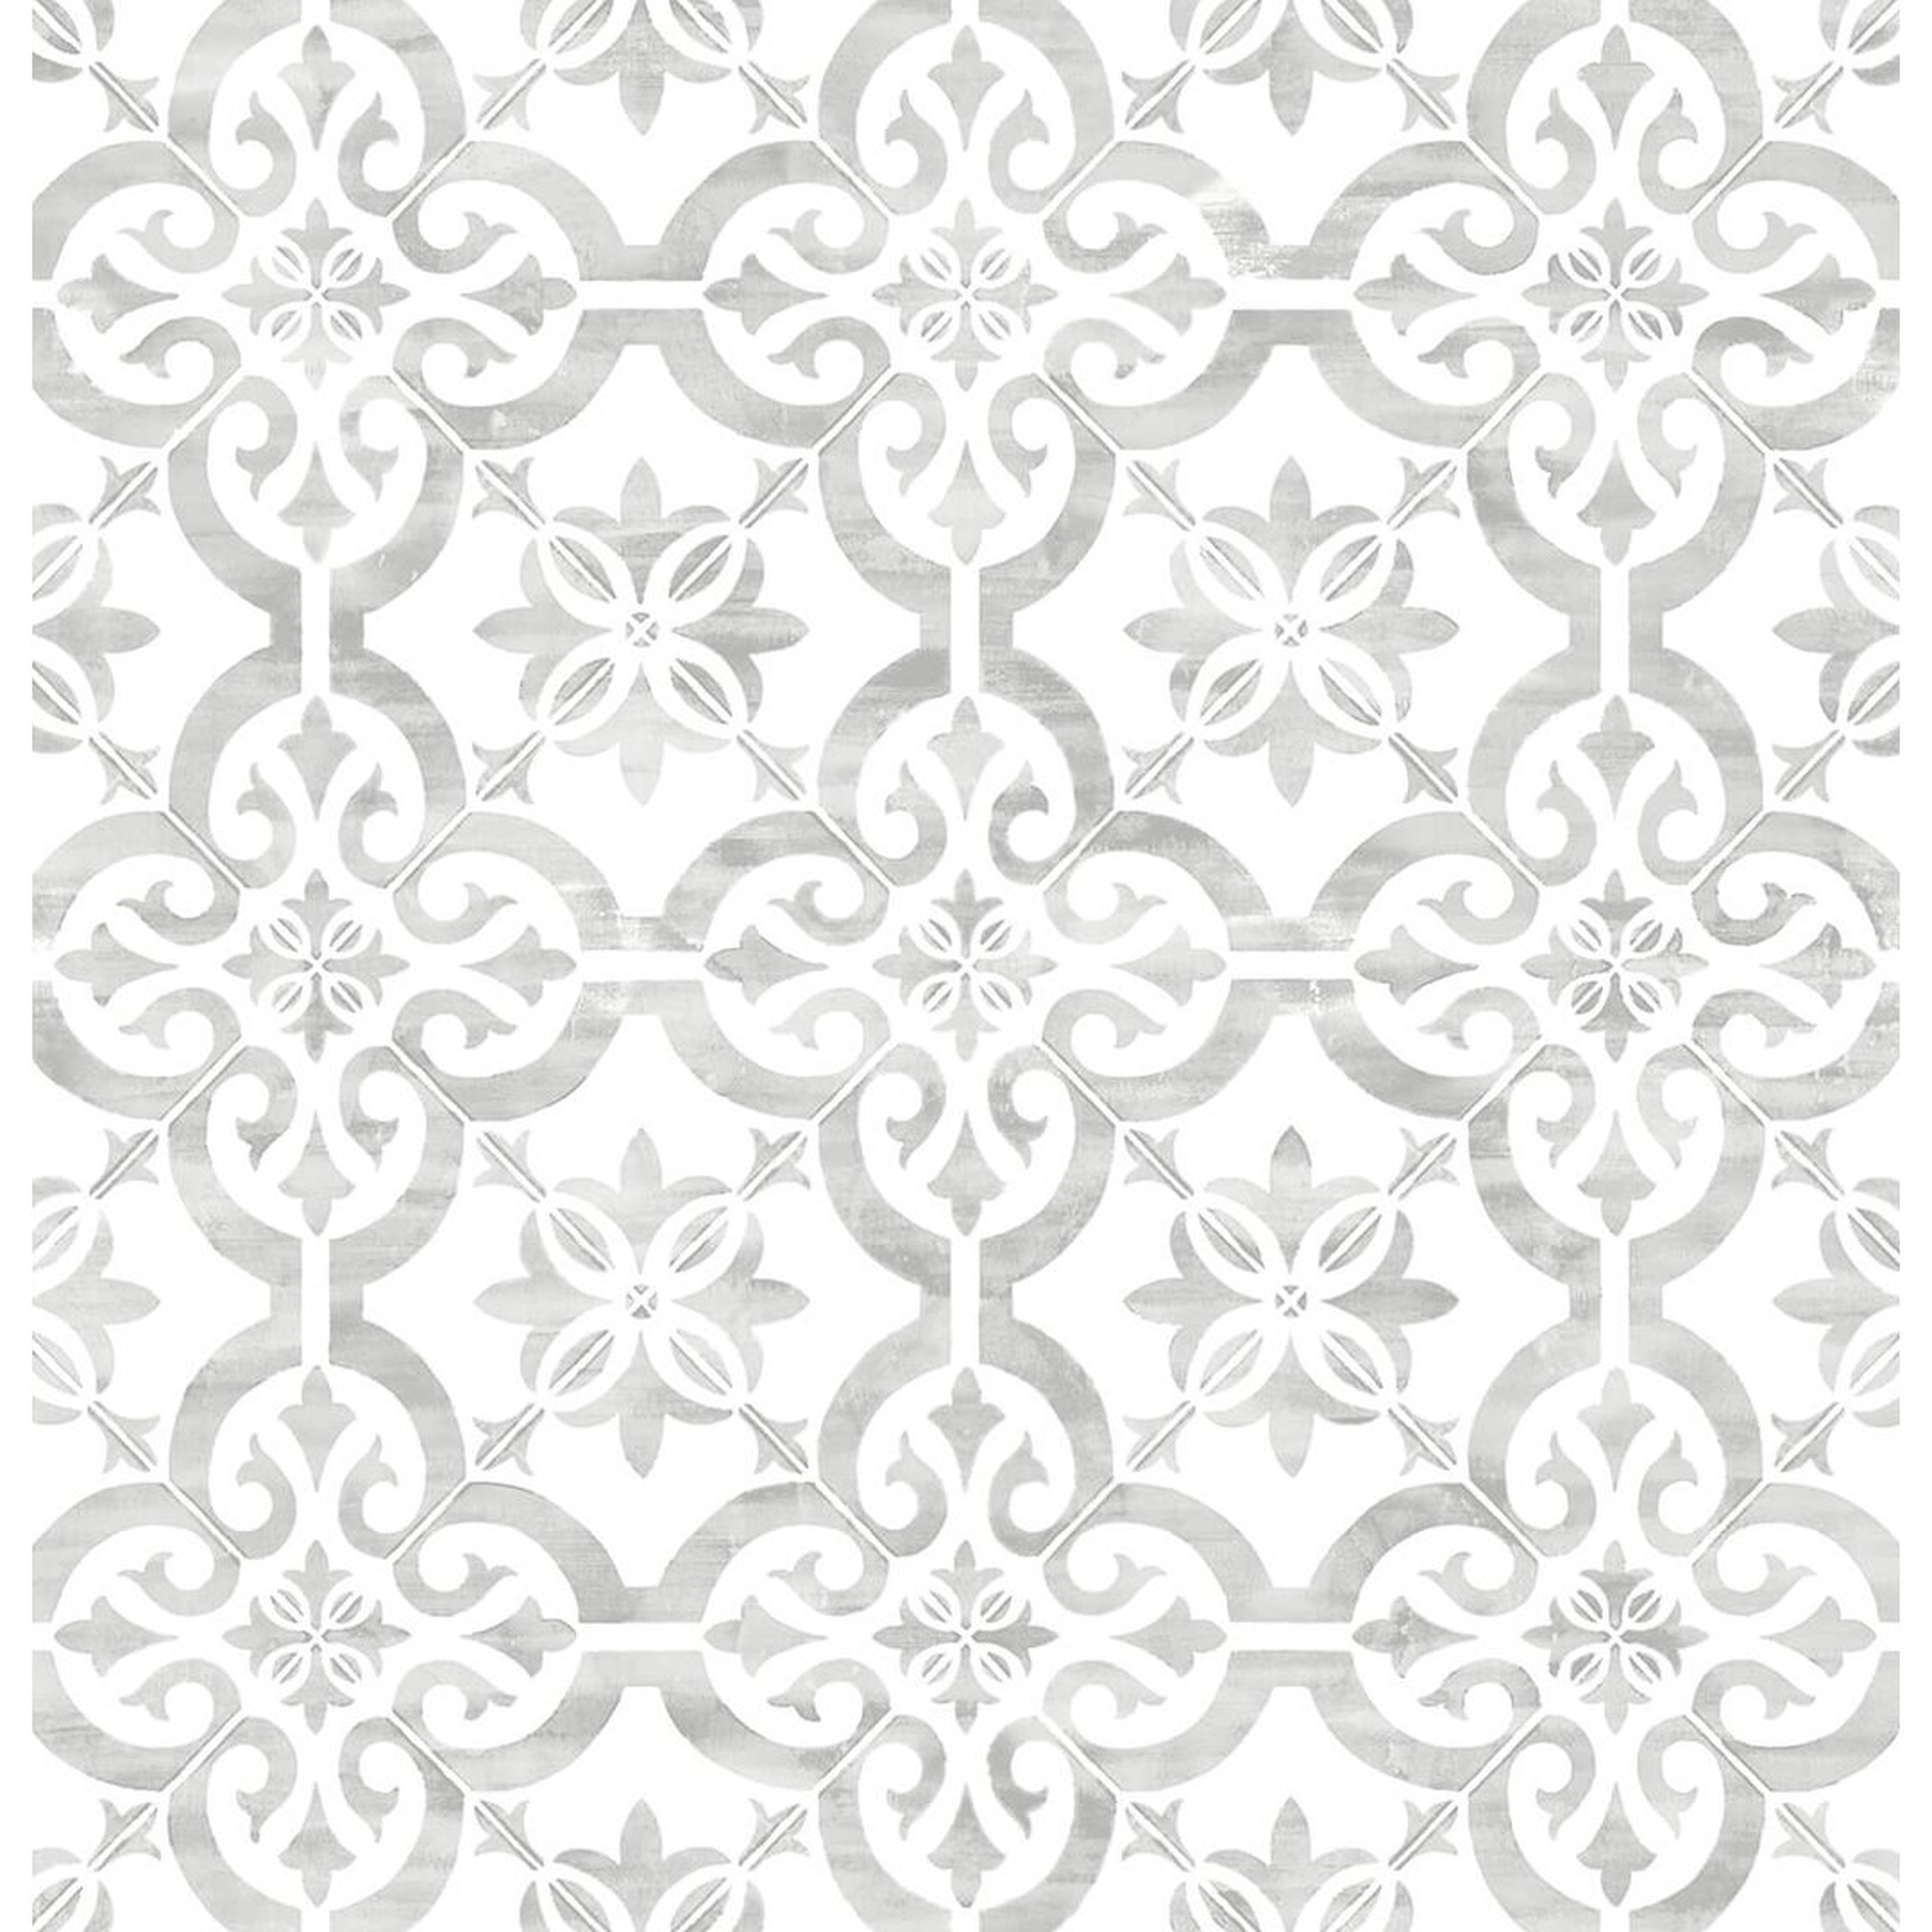 Lillian August Luxe Haven Porto Tile 9' L x 27"" W Smooth Peel and Stick Wallpaper Roll - Perigold